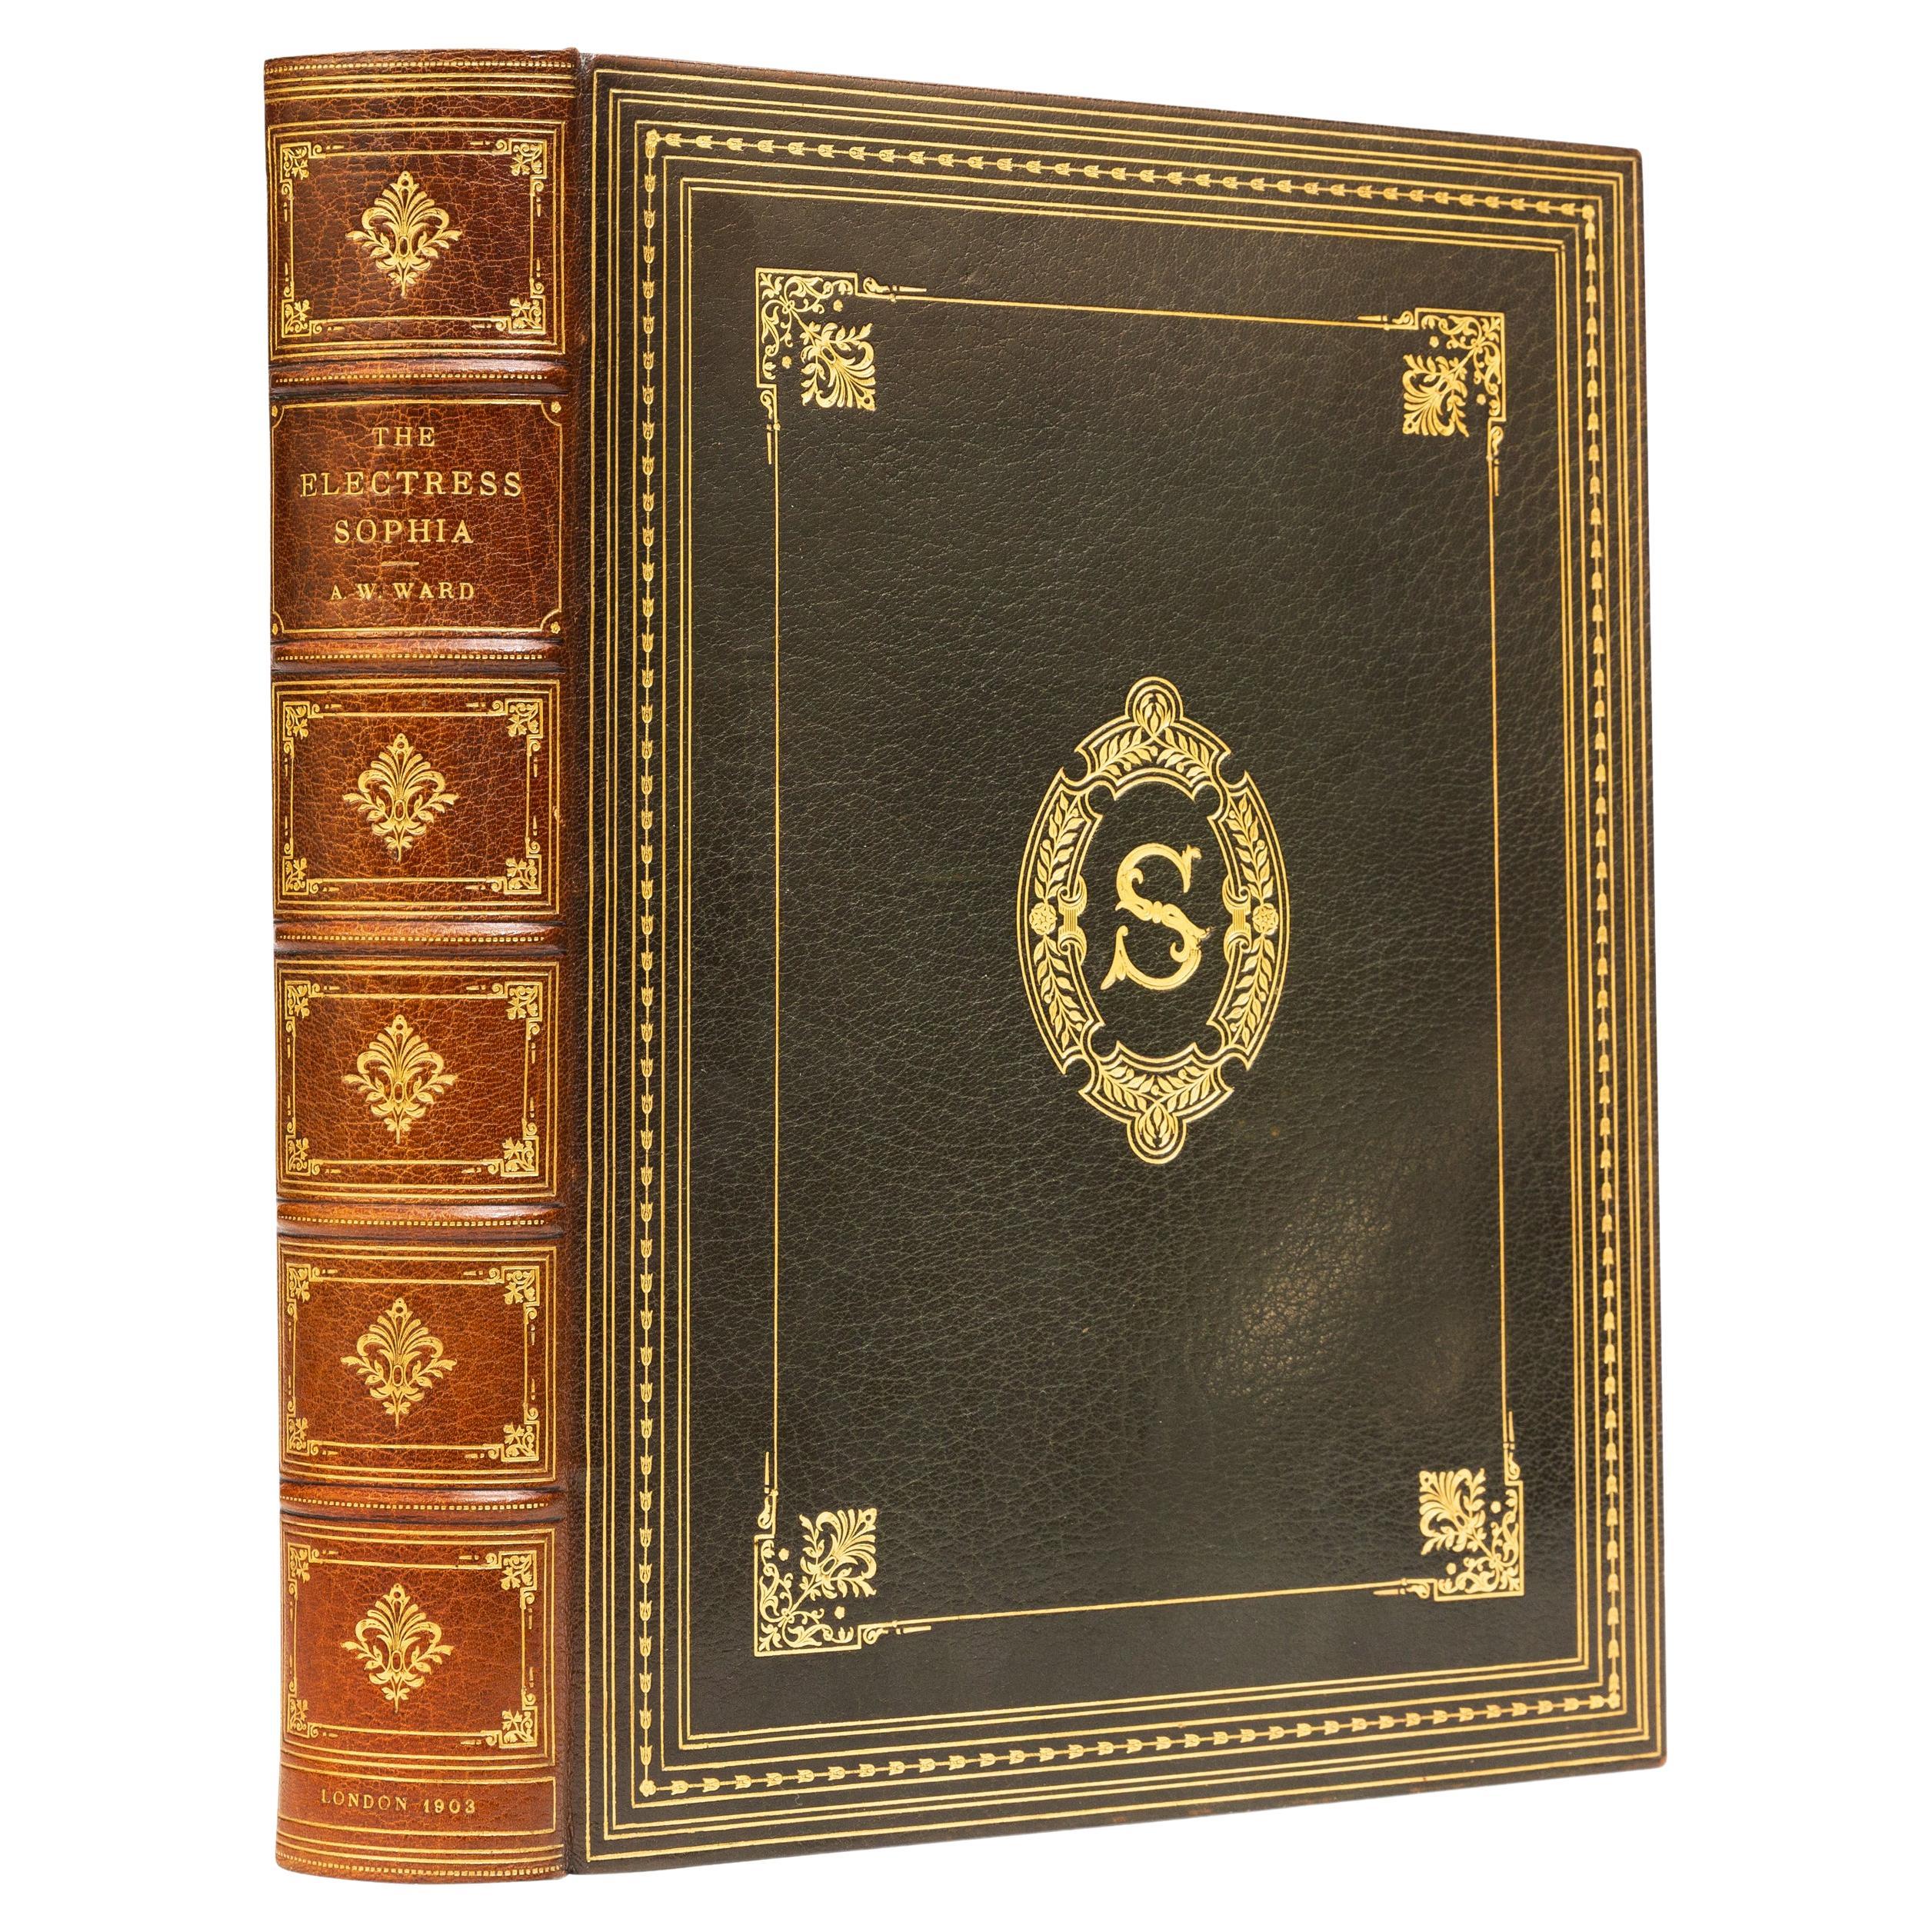 1 Volume, Adolphus William Ward, The Electress Sophia and the Hanover Succession For Sale